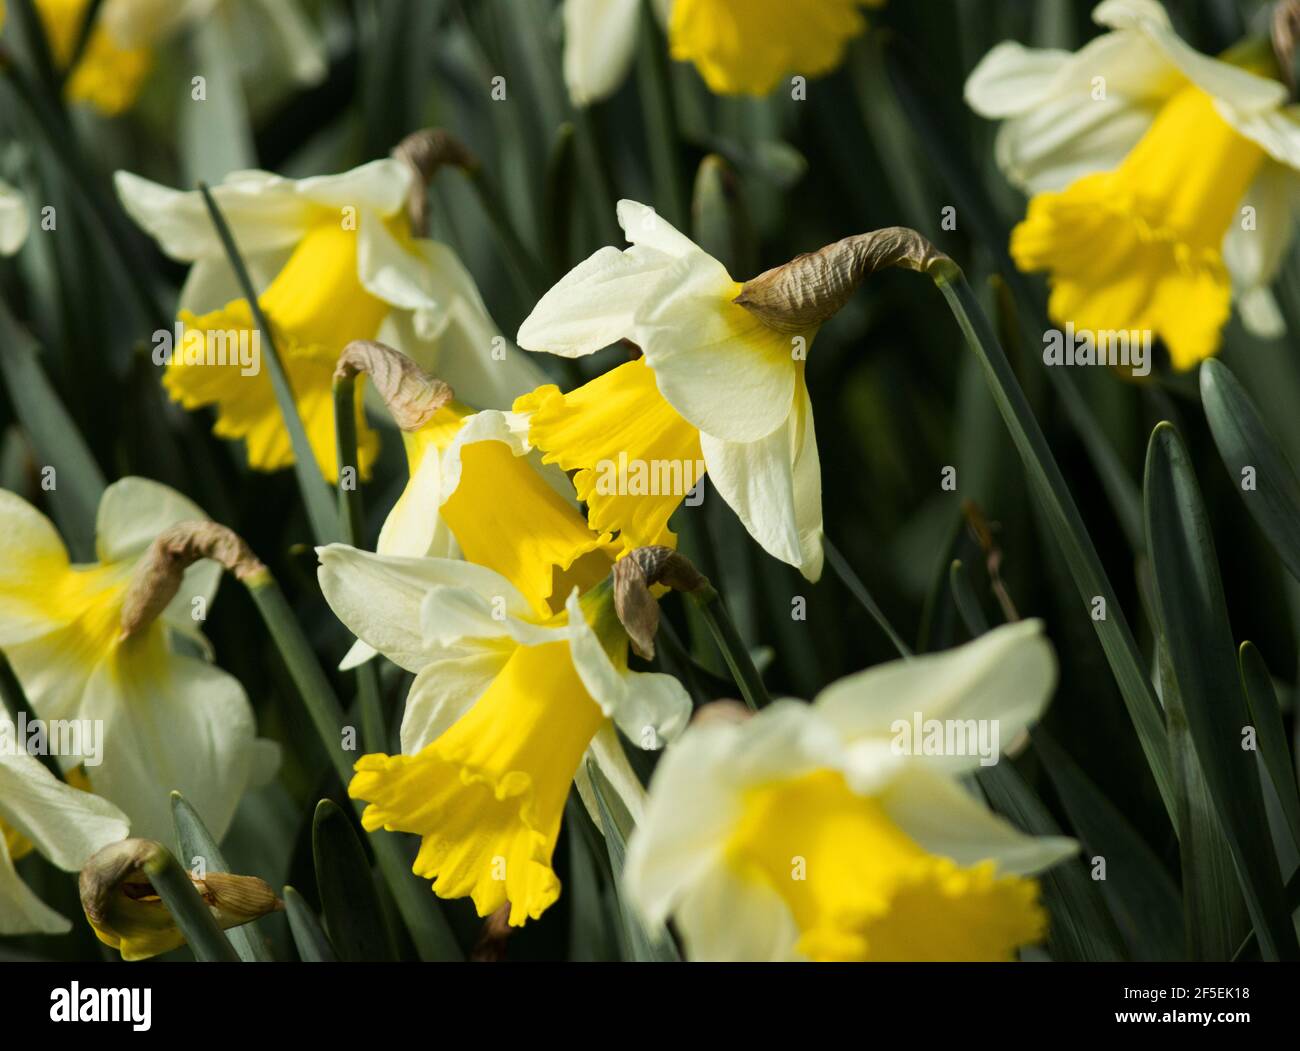 In spring the beds of daffodils erupt in parks, gardens and woodlands bringing an end to the drabness of winter. The Daffodil was introduced to the UK Stock Photo